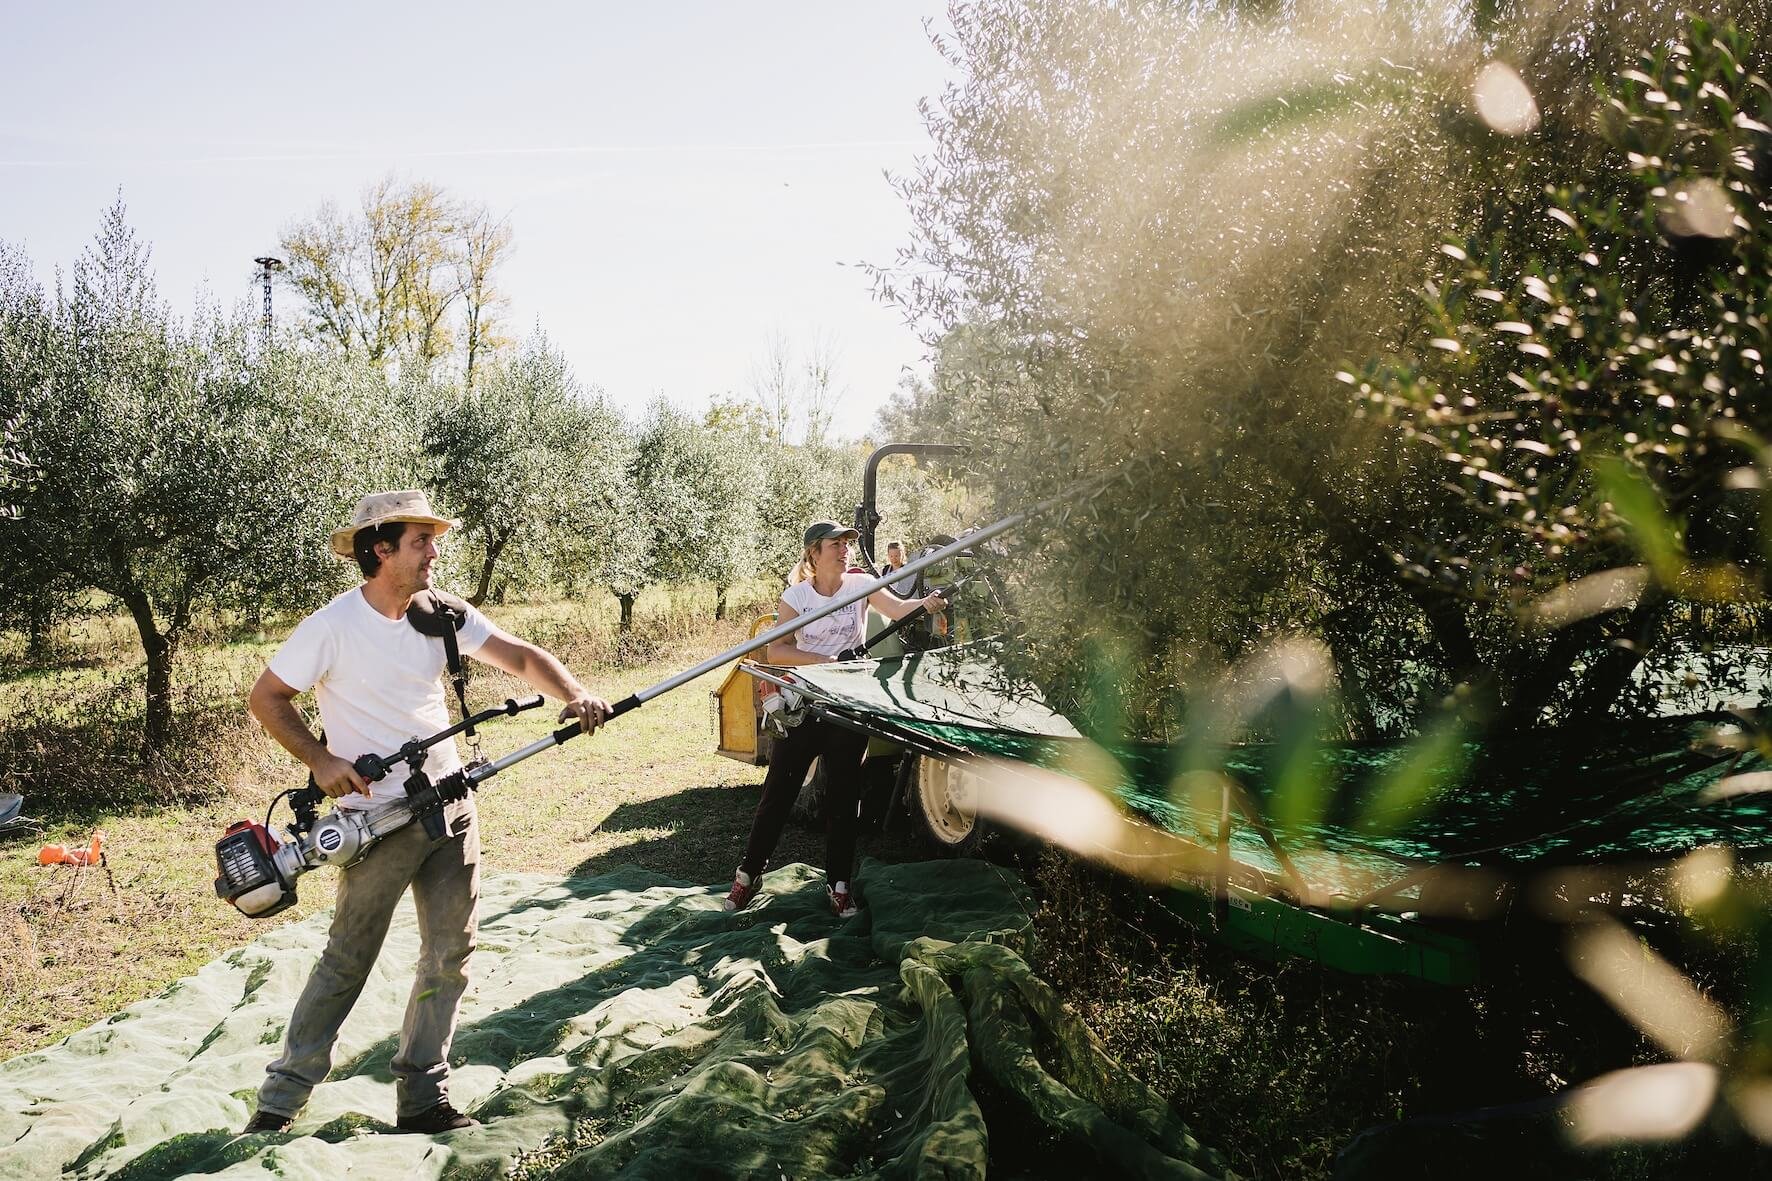 passeite farm, portugal, harvesting olives with power tools